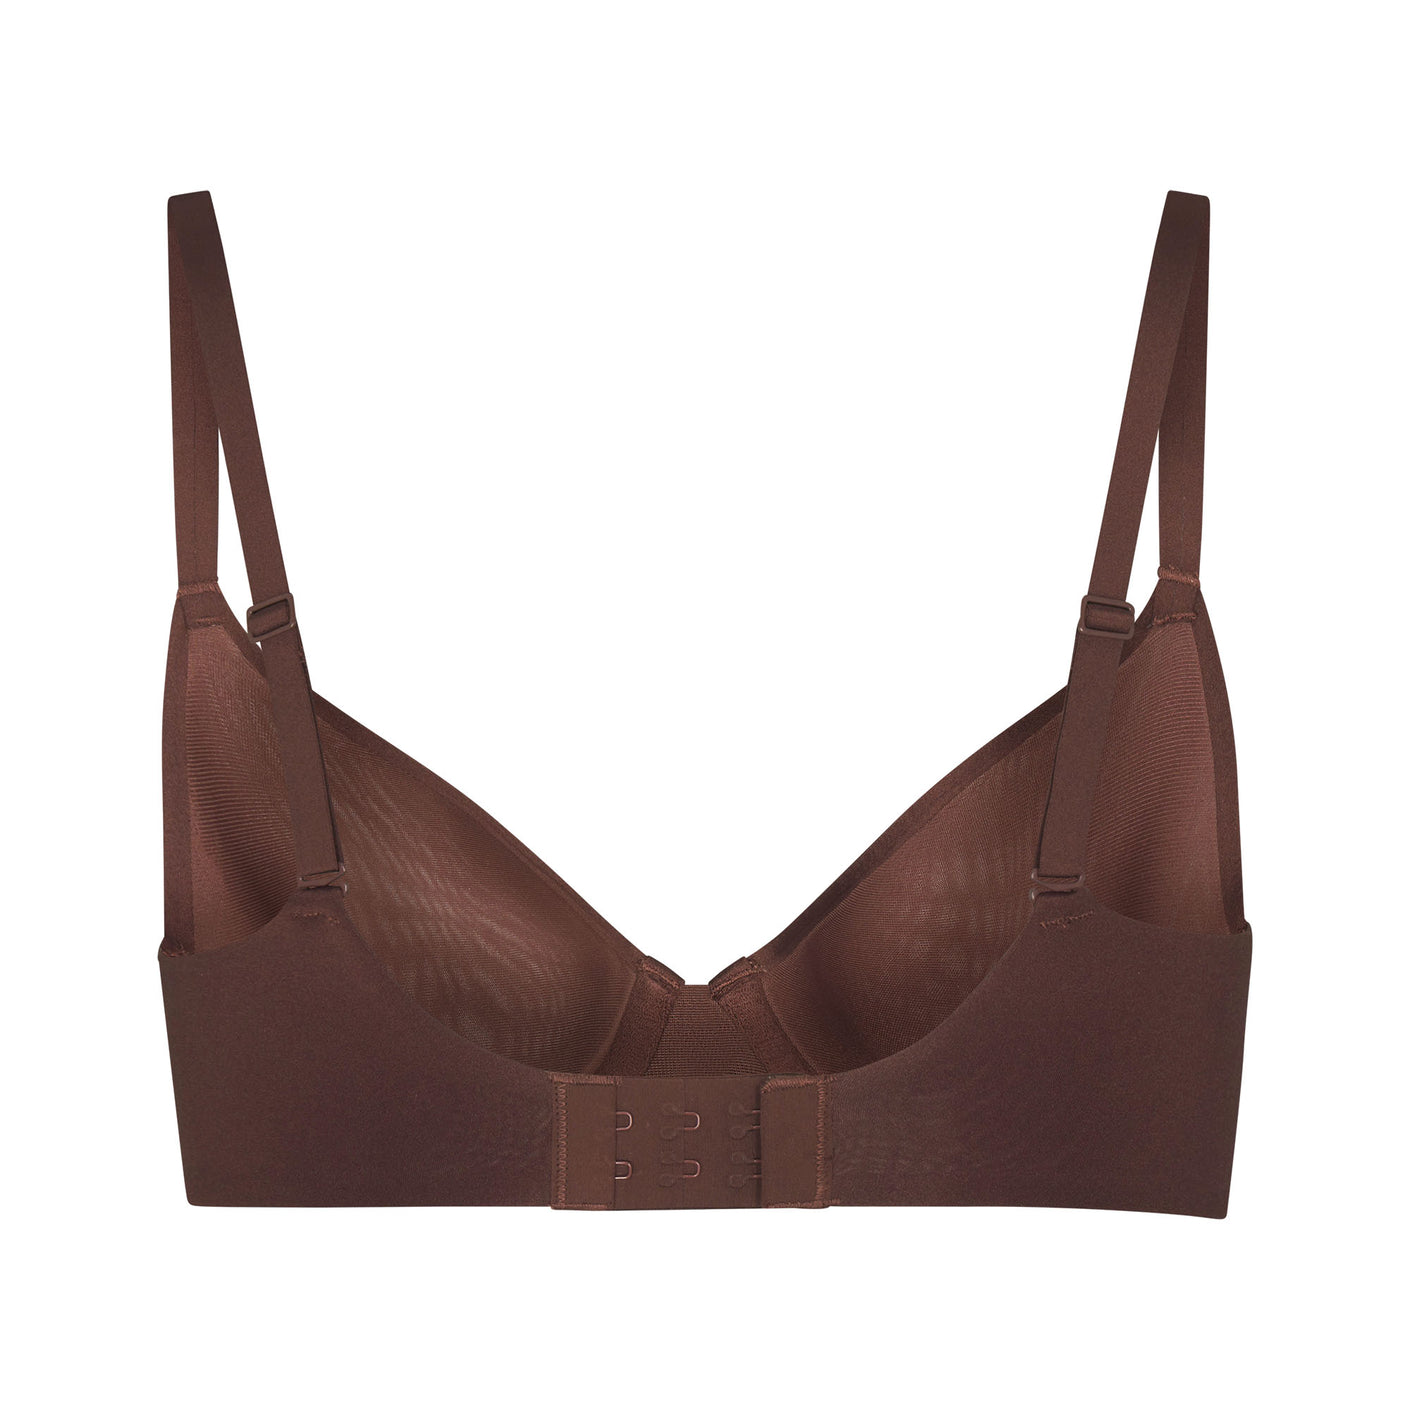 SKIMS Fits Everybody Unlined Demi Underwire Bra, Brown/Oxide 40DD NWT Size  undefined - $41 New With Tags - From Jessica